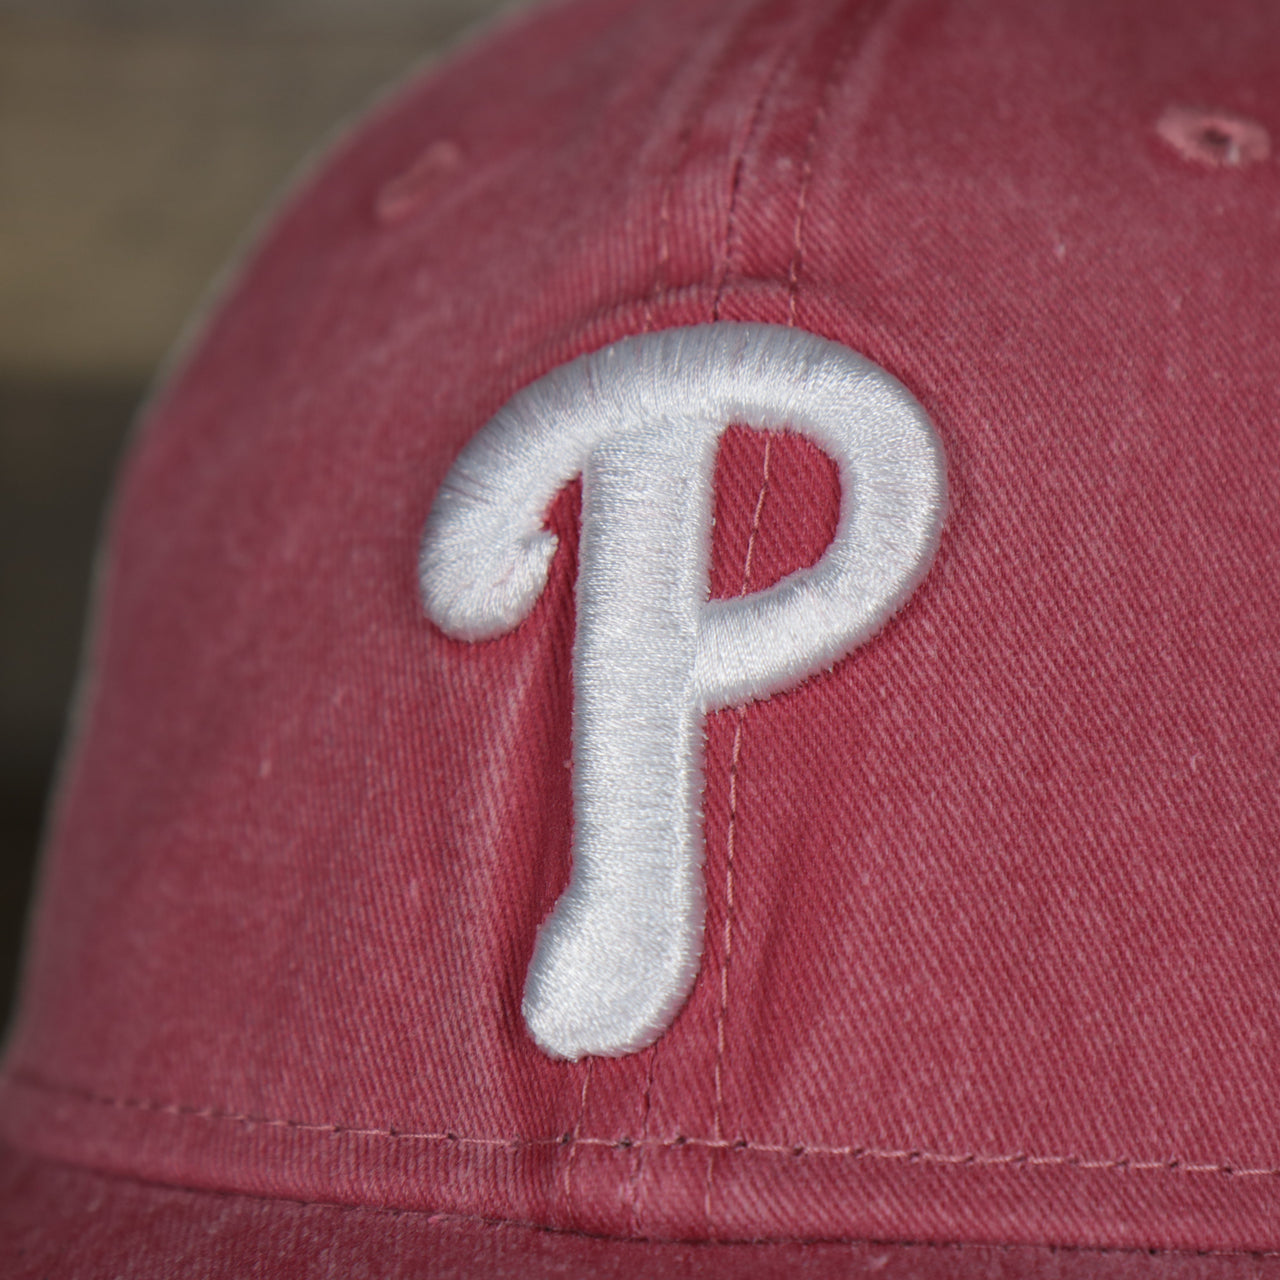 A close up of the 76ers logo on the Philadelphia Phillies New Era 9Twenty Washed Trucker hat